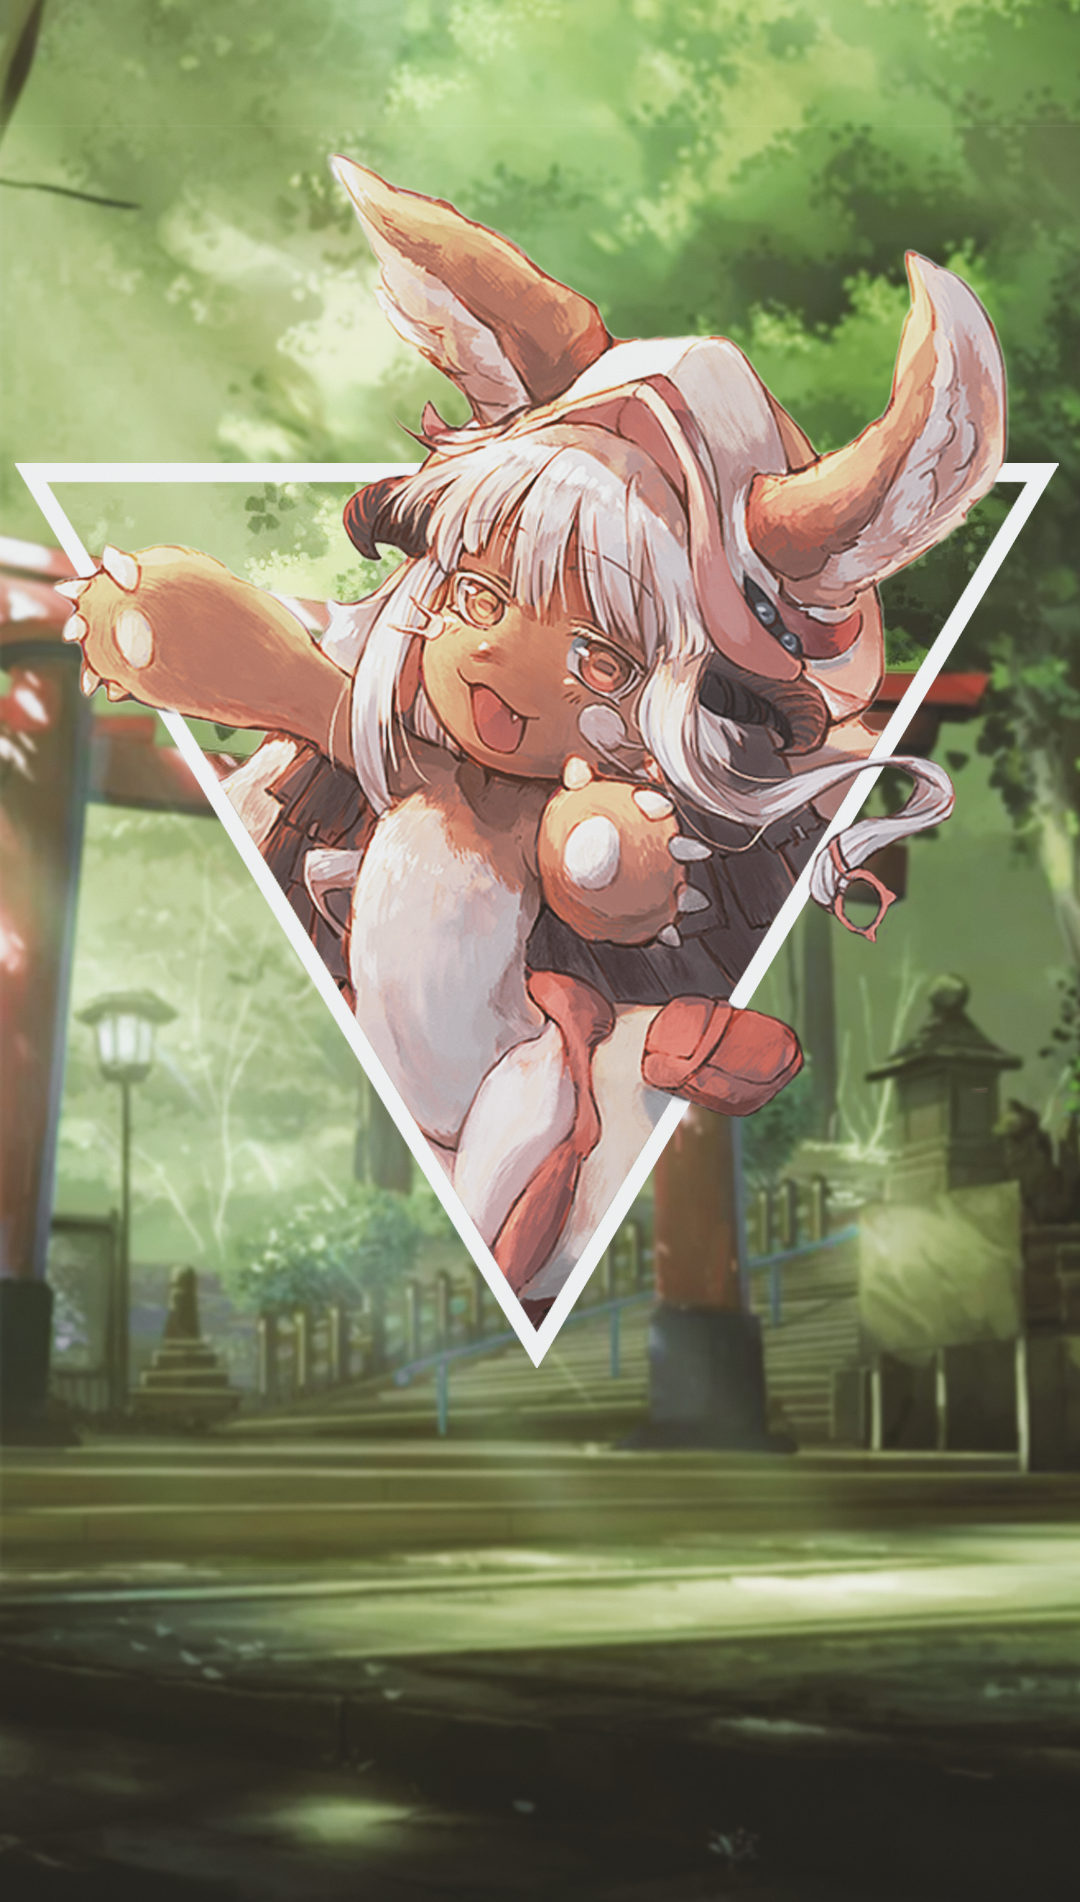 Anime 1080x1902 anime anime girls picture-in-picture Made in Abyss Nanachi (Made in Abyss)